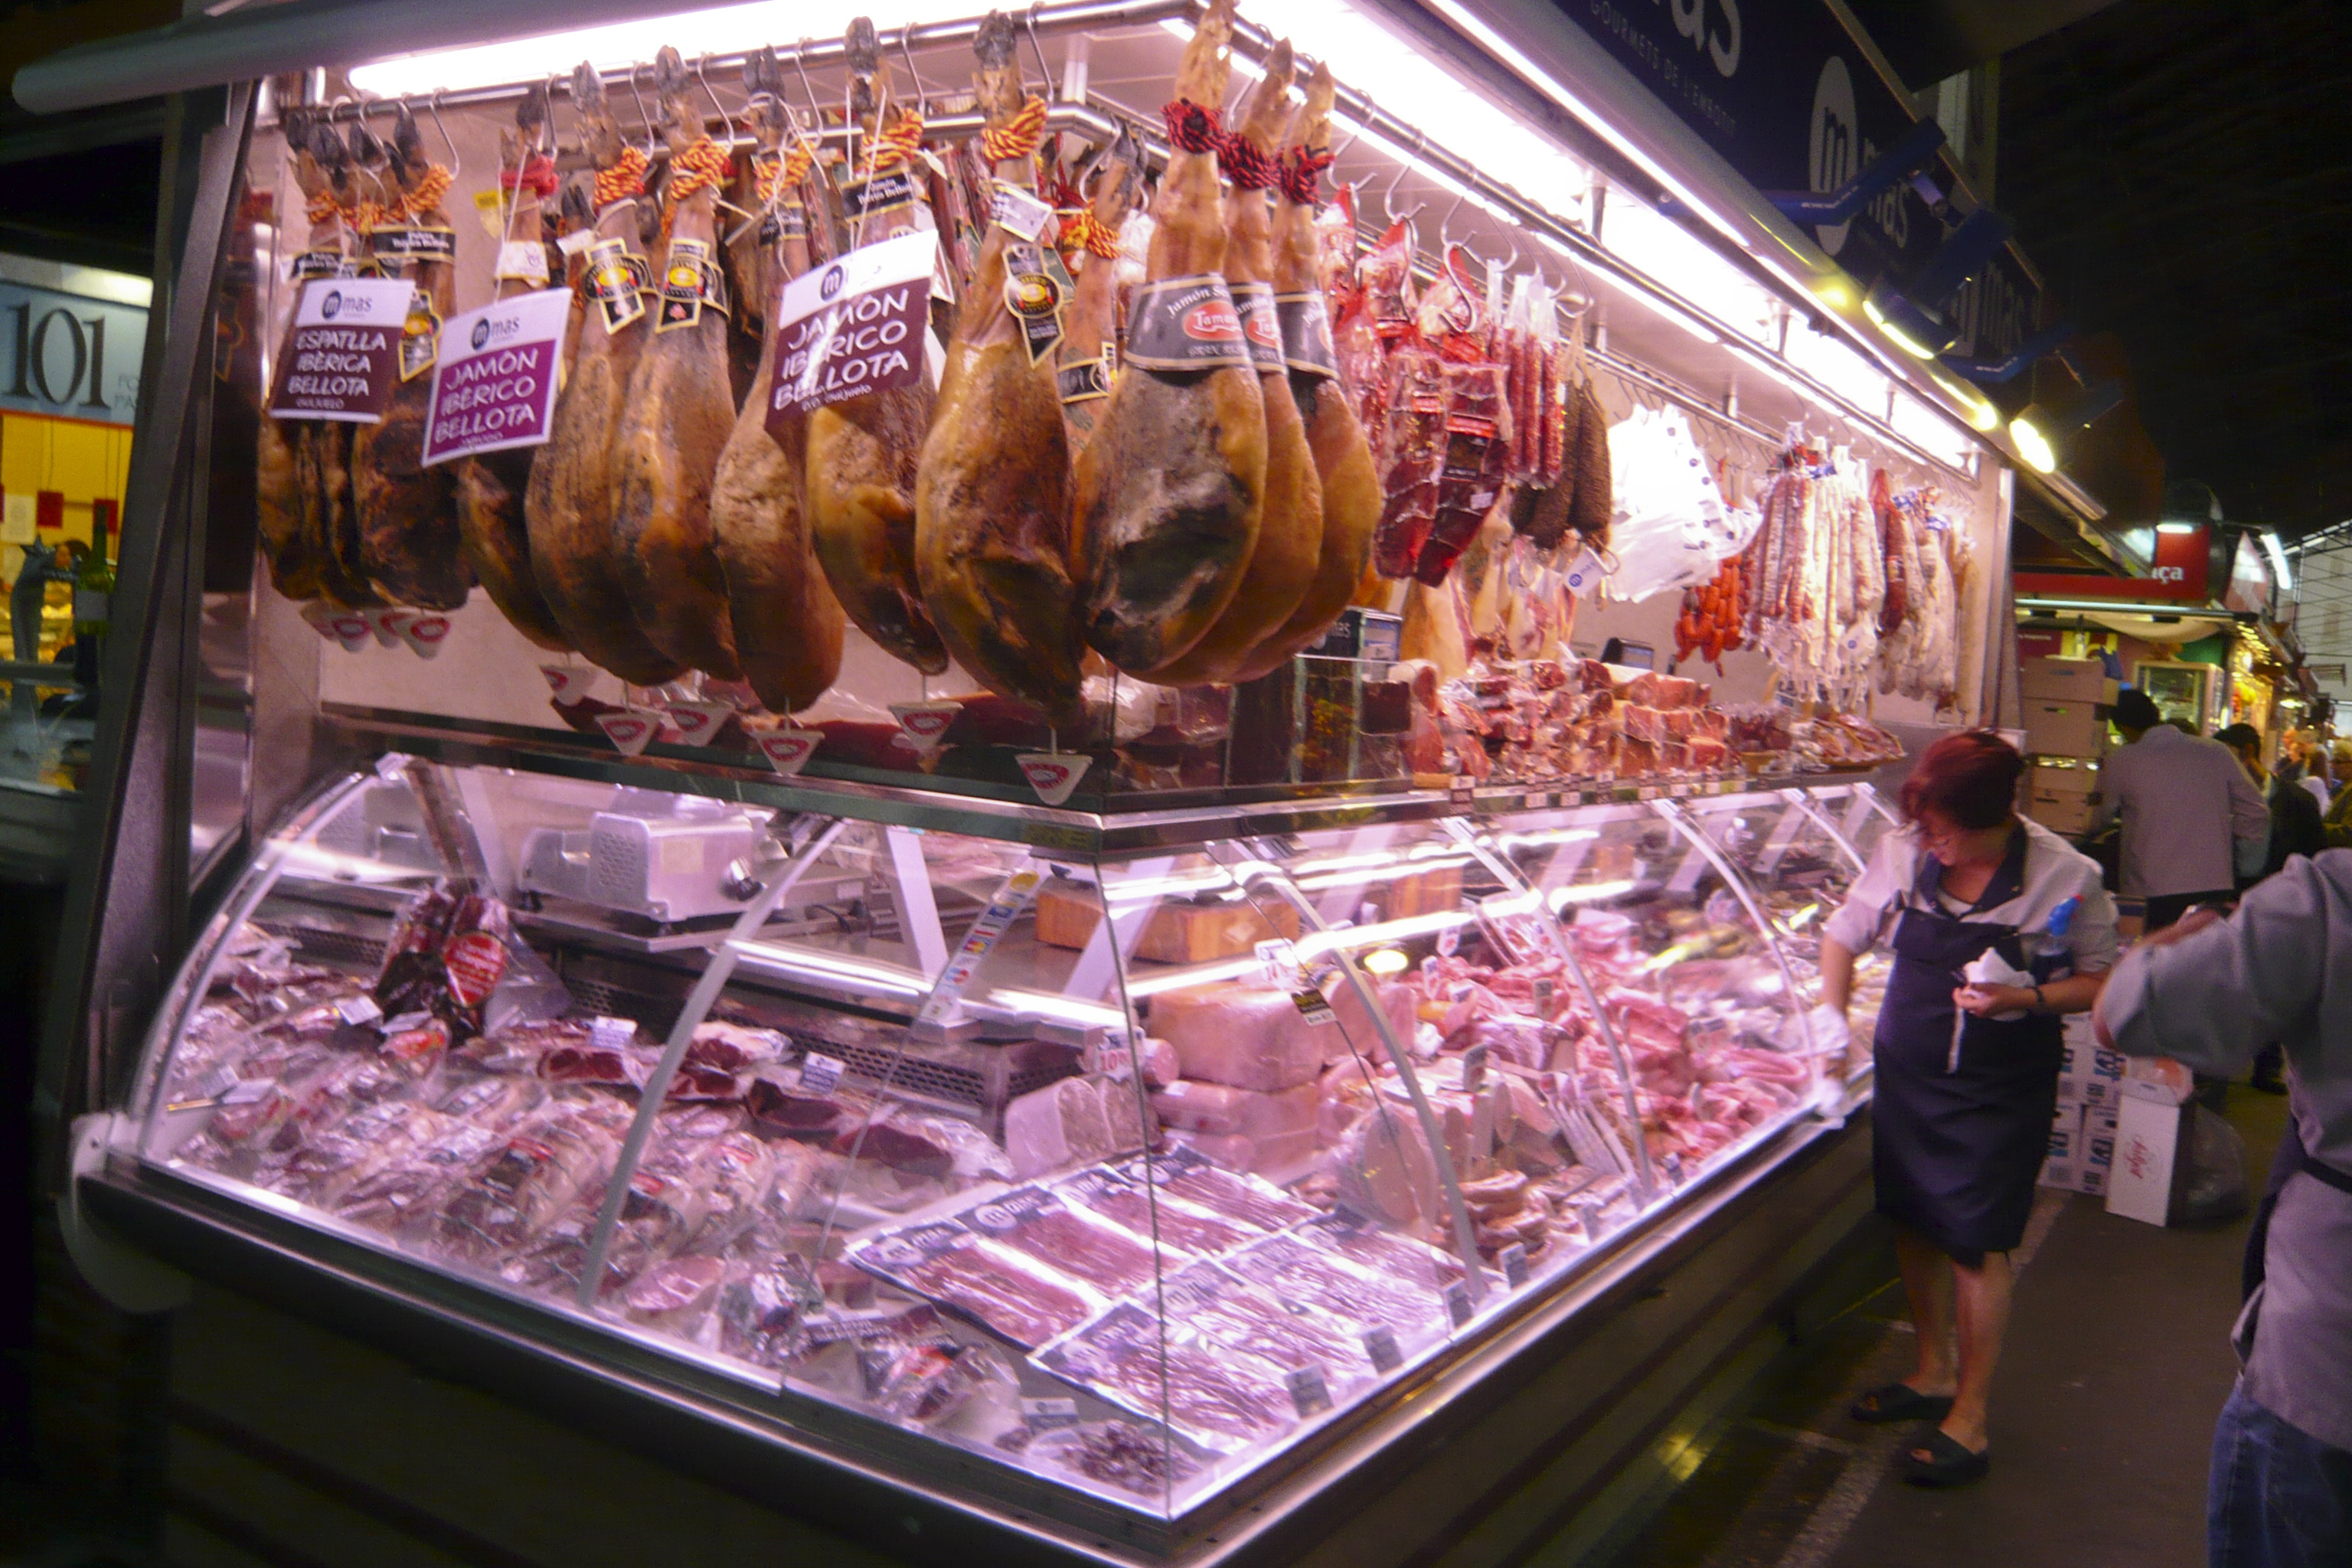 File:Meat stall at Barcelona market (2930204622).jpg - Wikimedia Commons